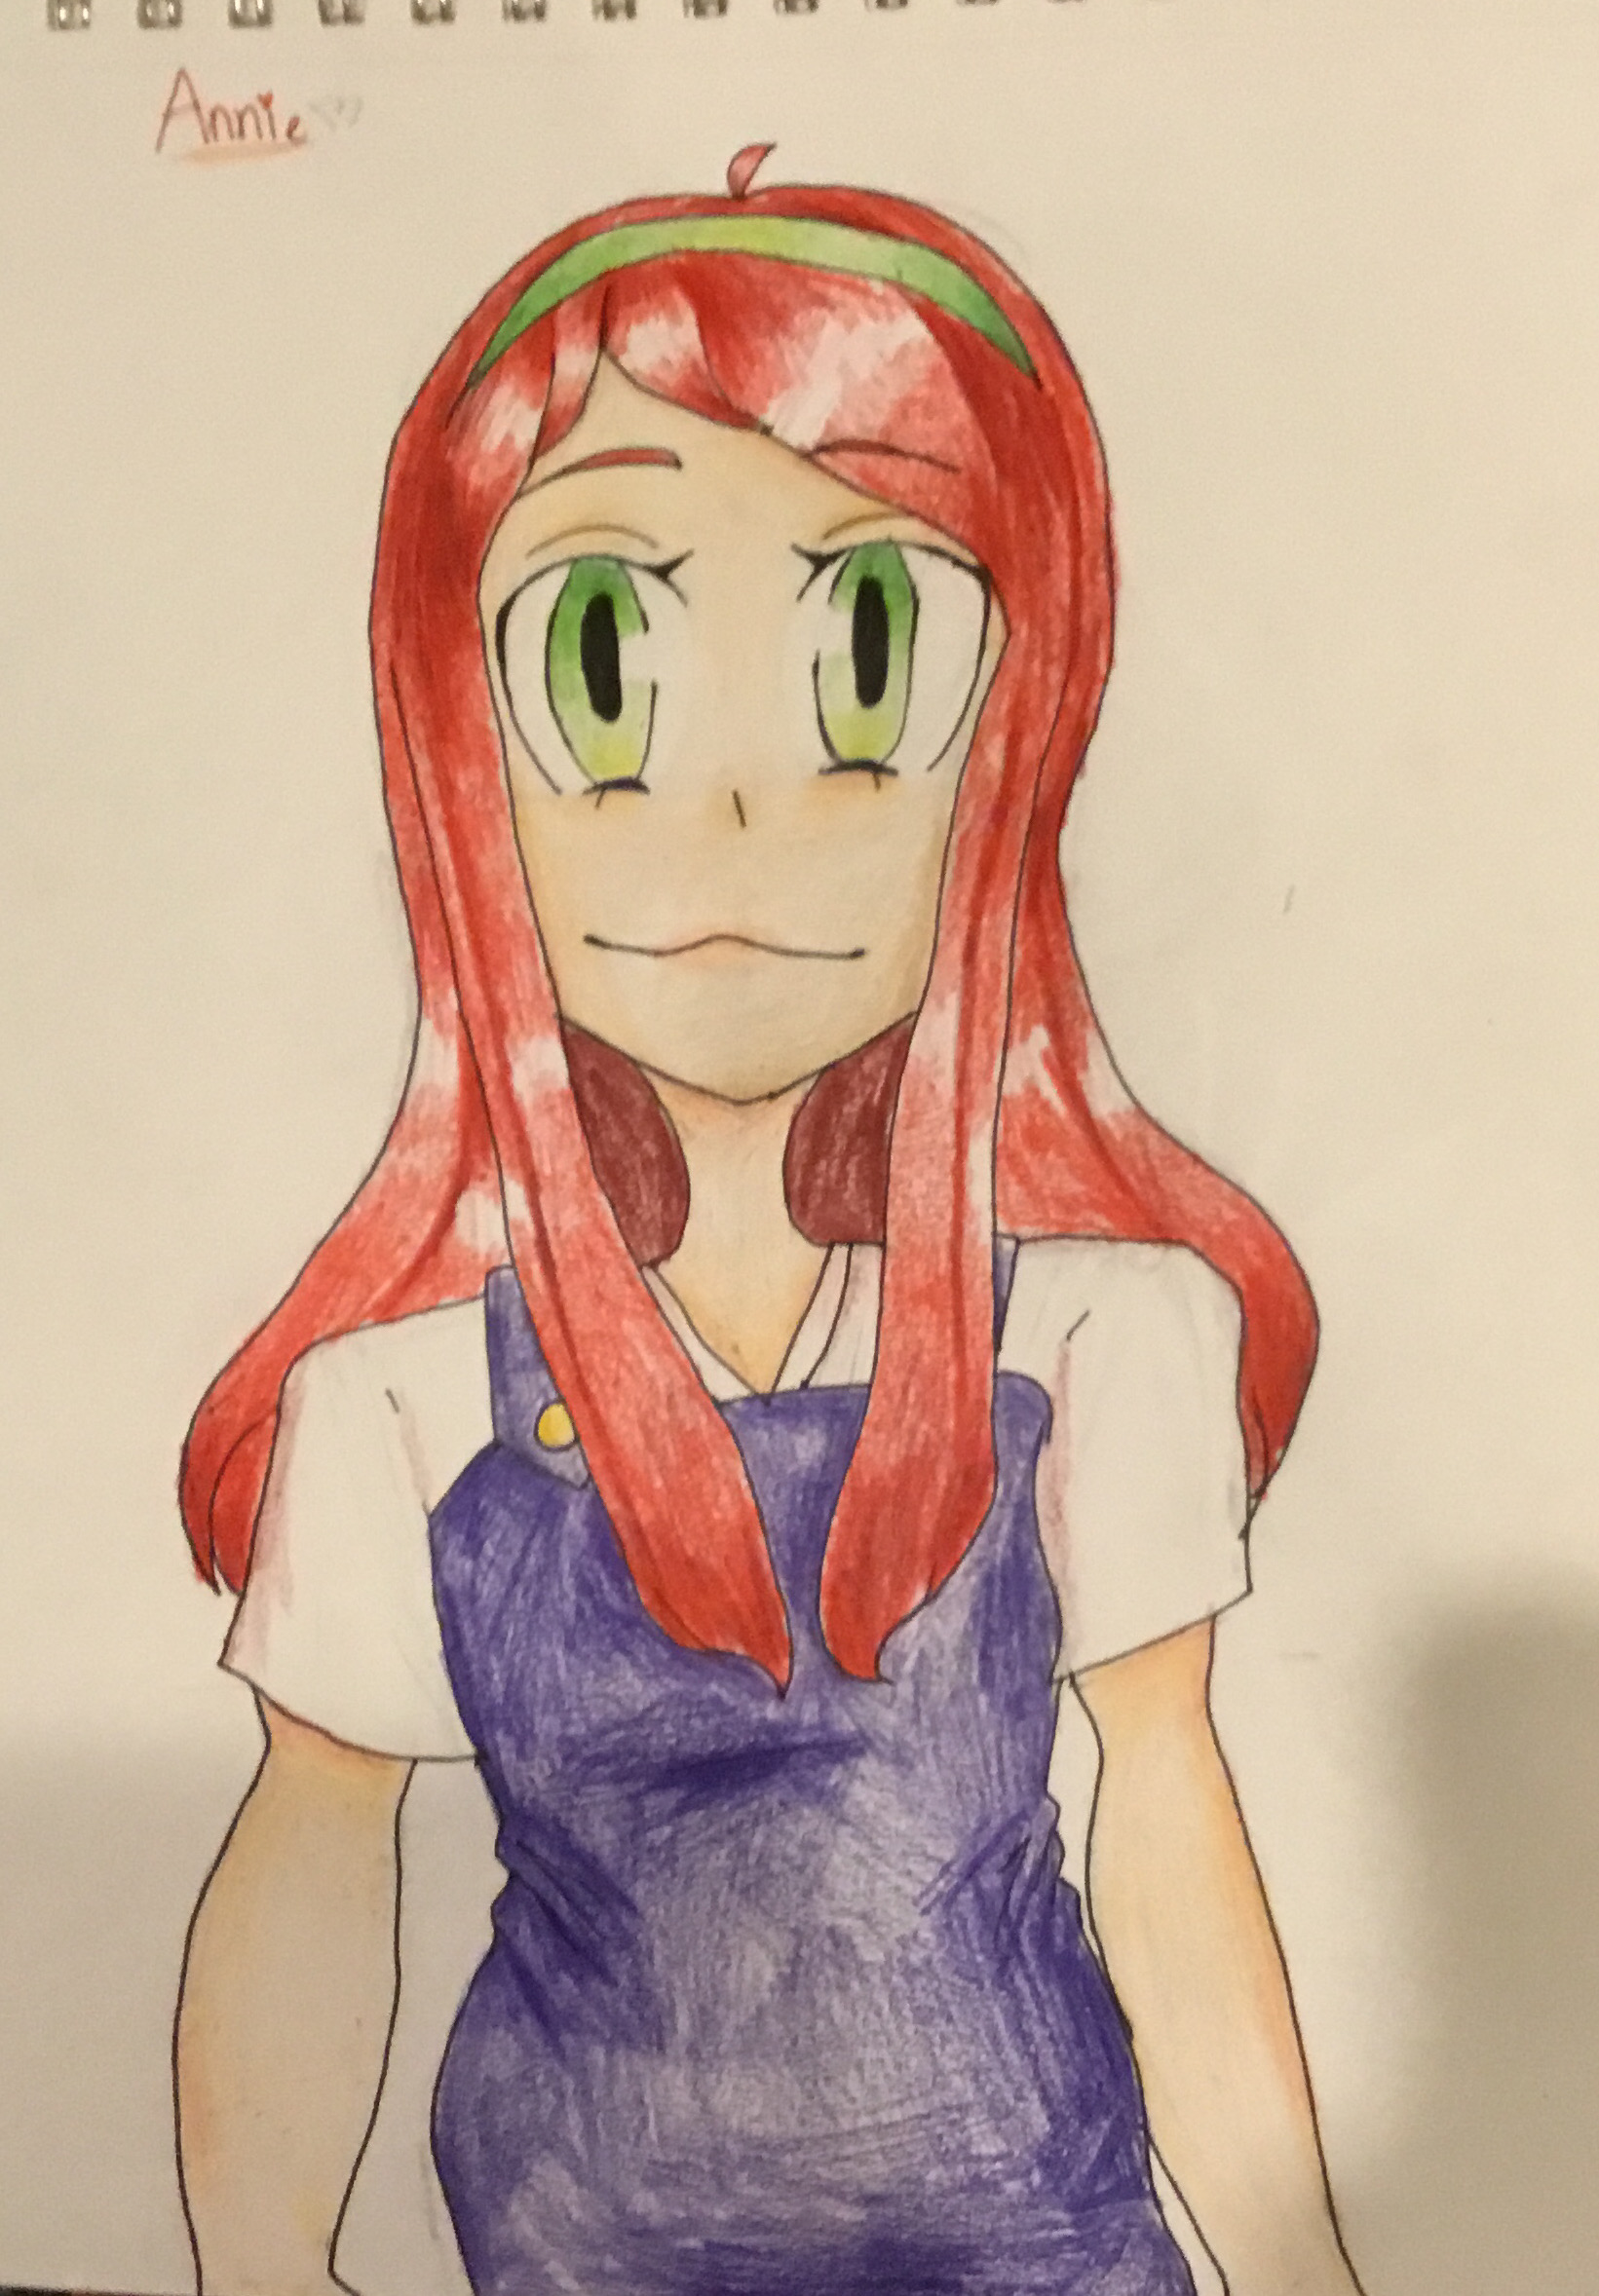 Robloxcharacter Roblox Girl Overalls A Image By Leafyy - robloxcharacter roblox girl overalls a image by leafyy